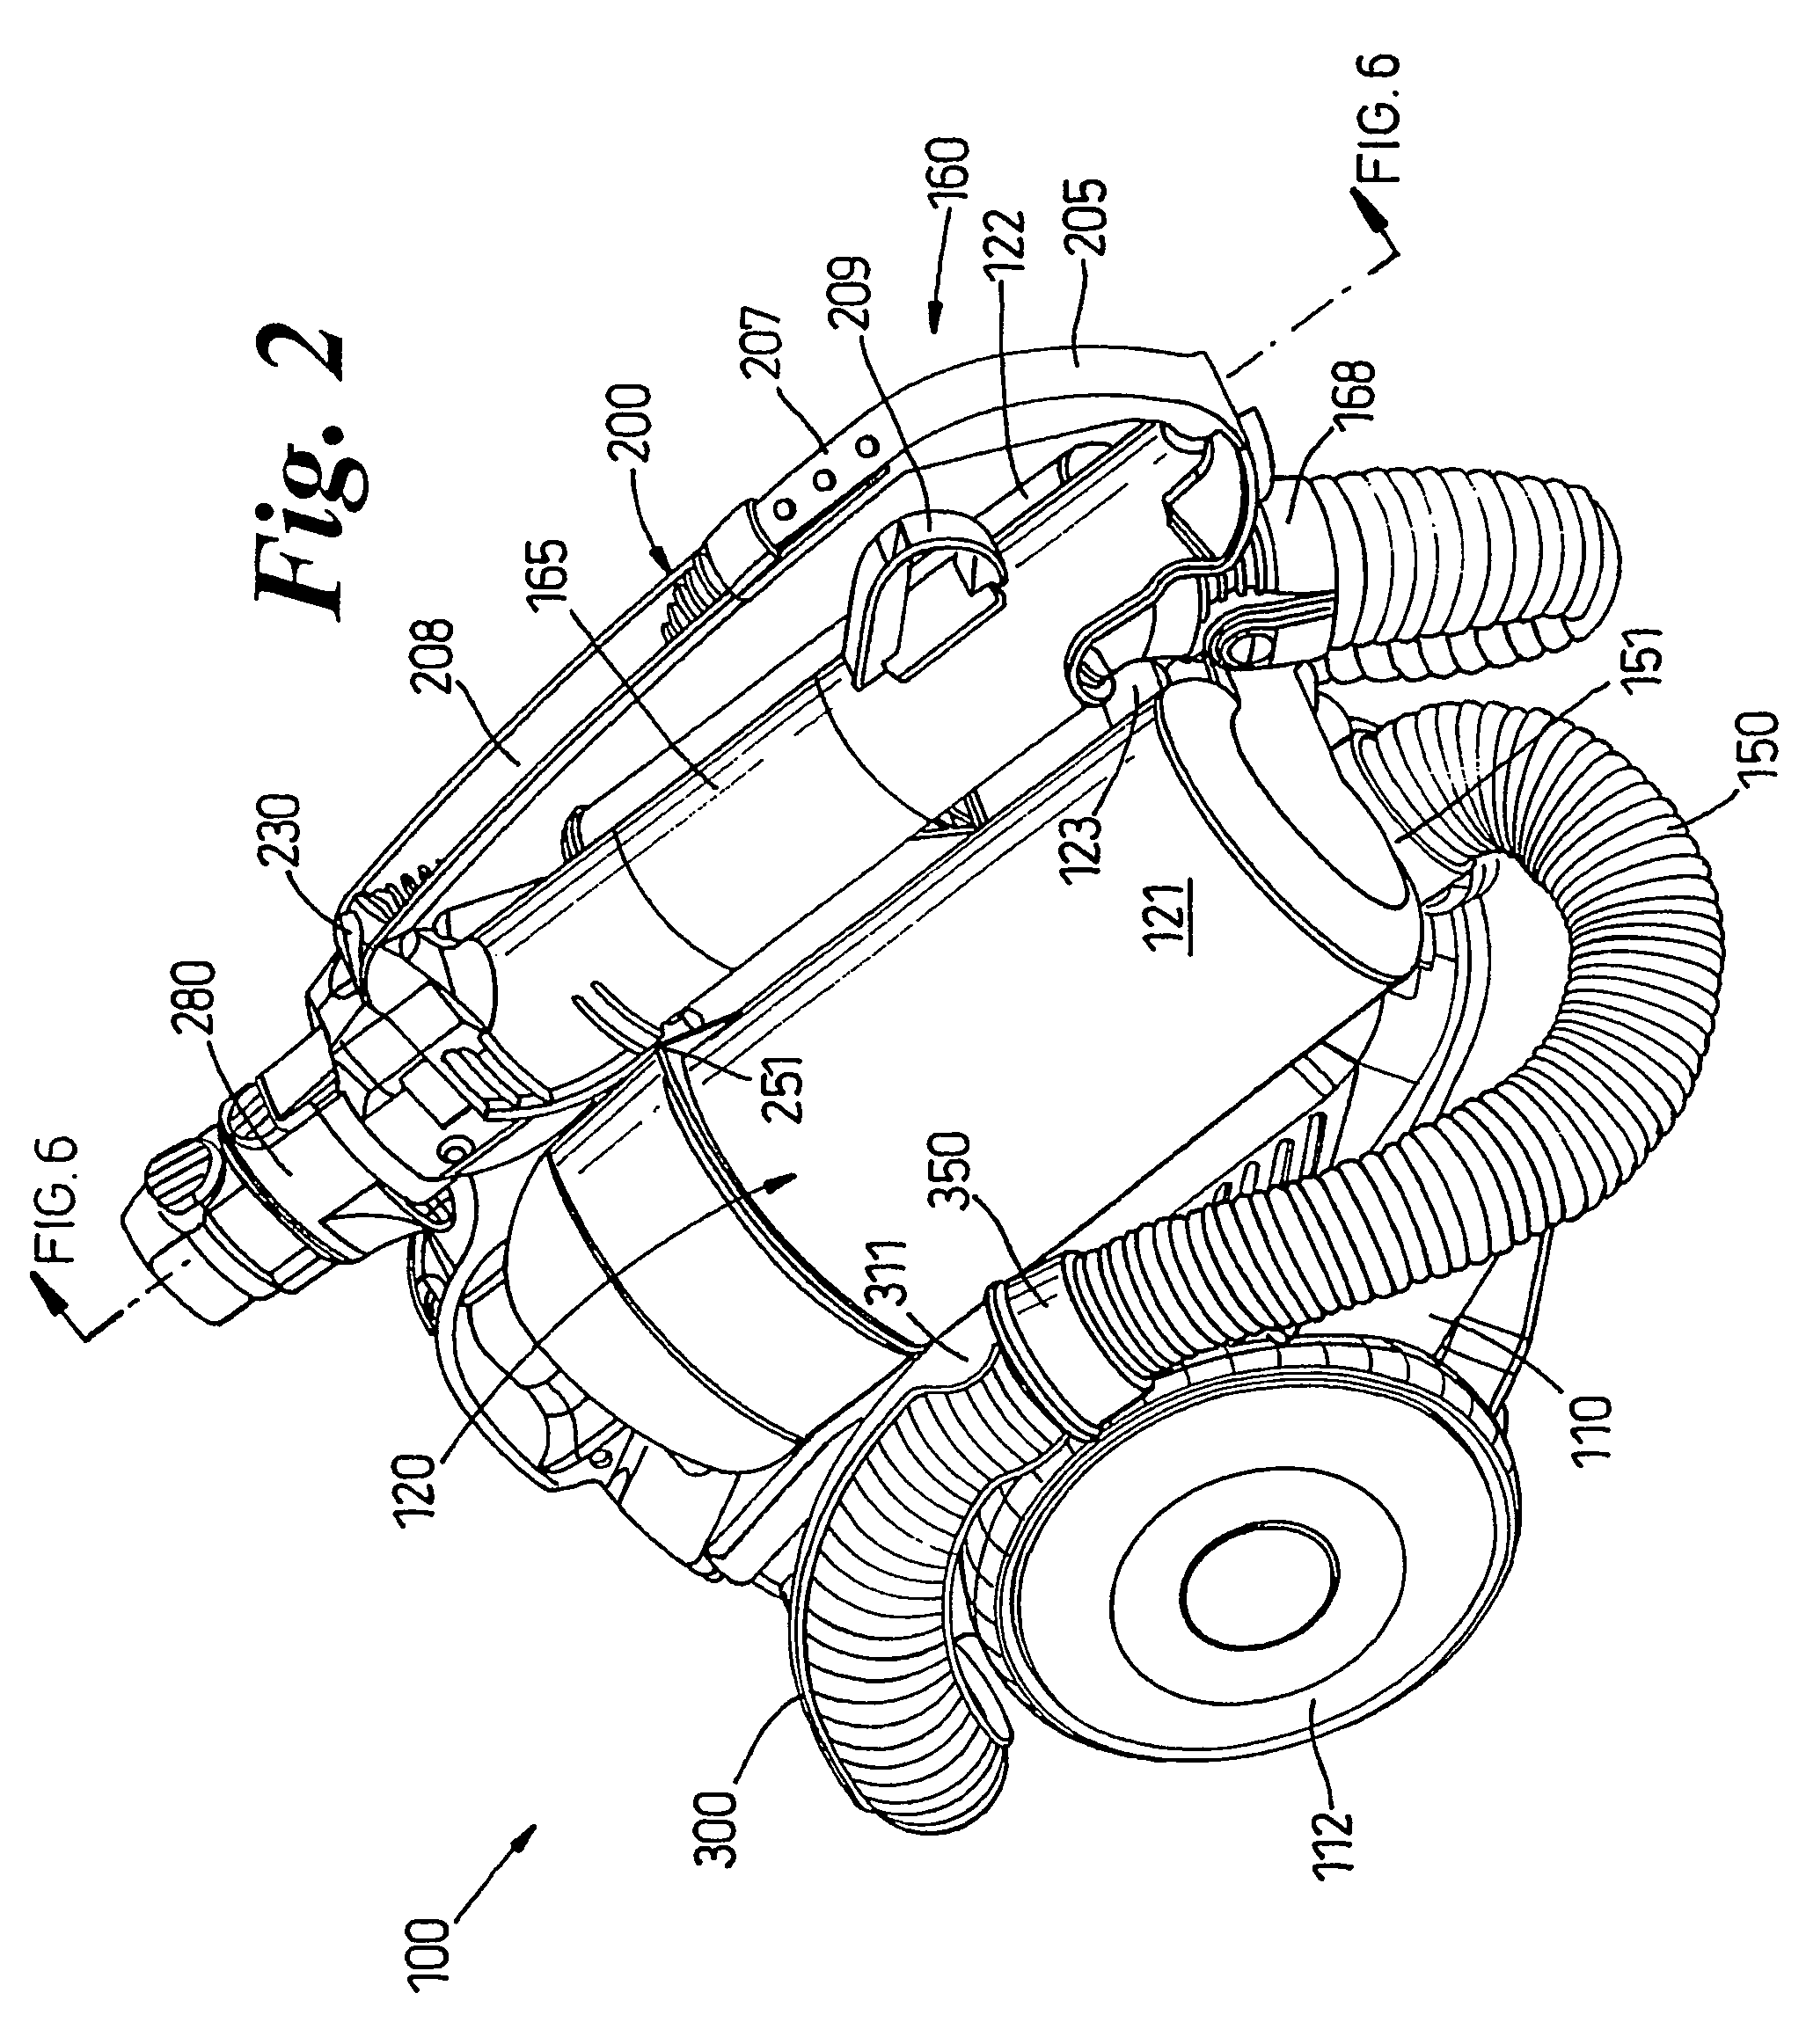 Cleaning appliance including a telescopic wand assembly retainer